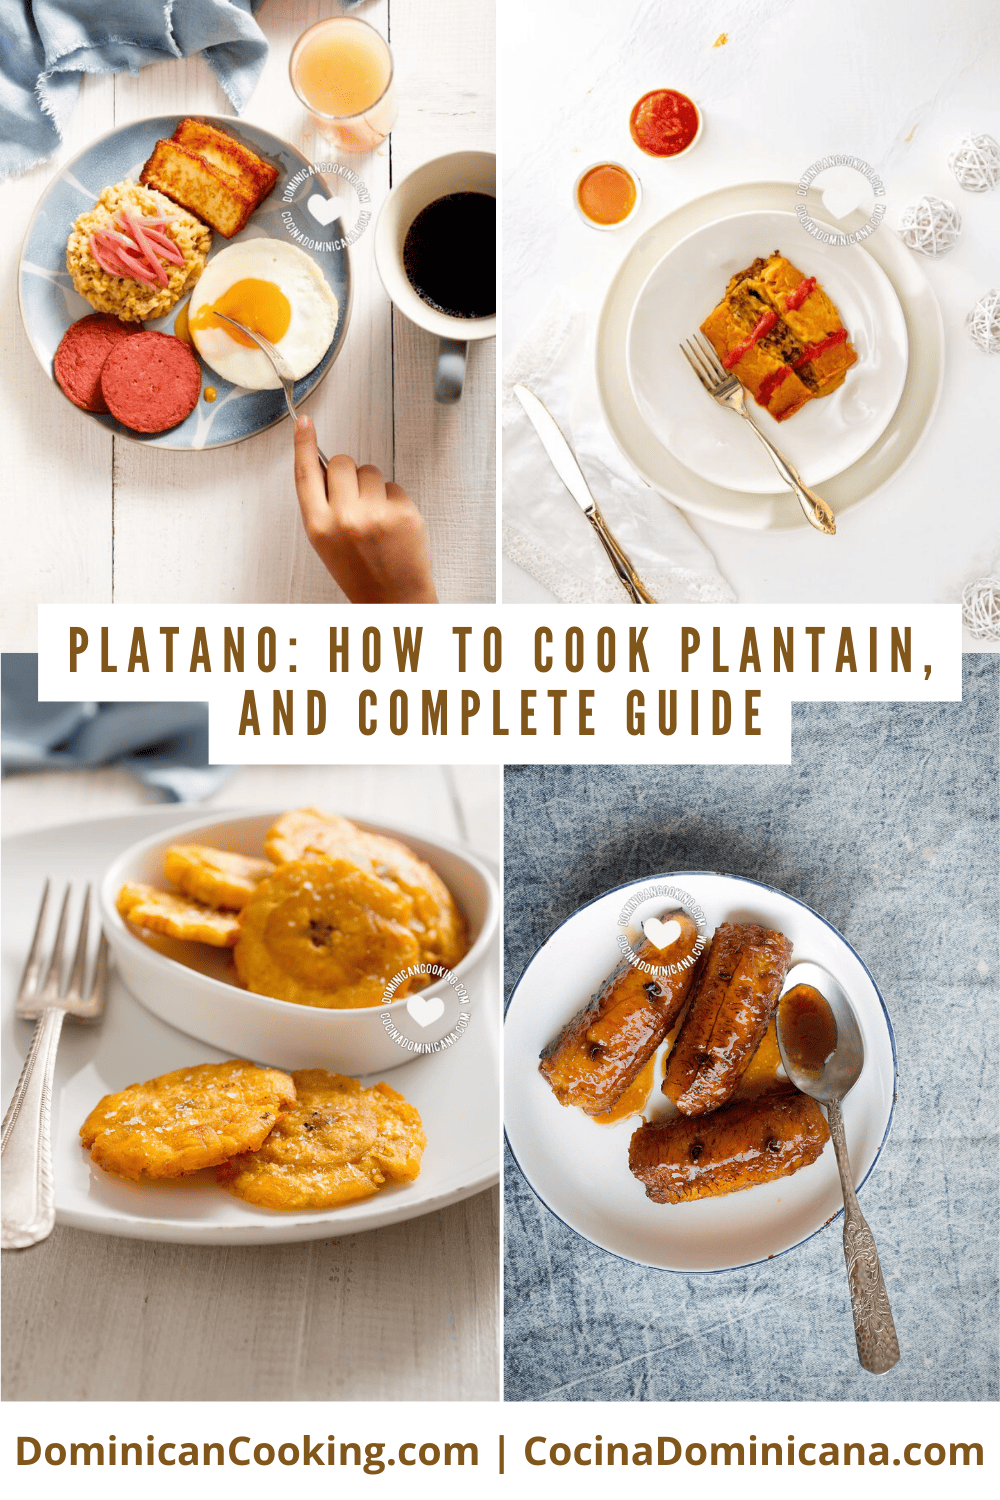 Platano: how to cook and complete guide.